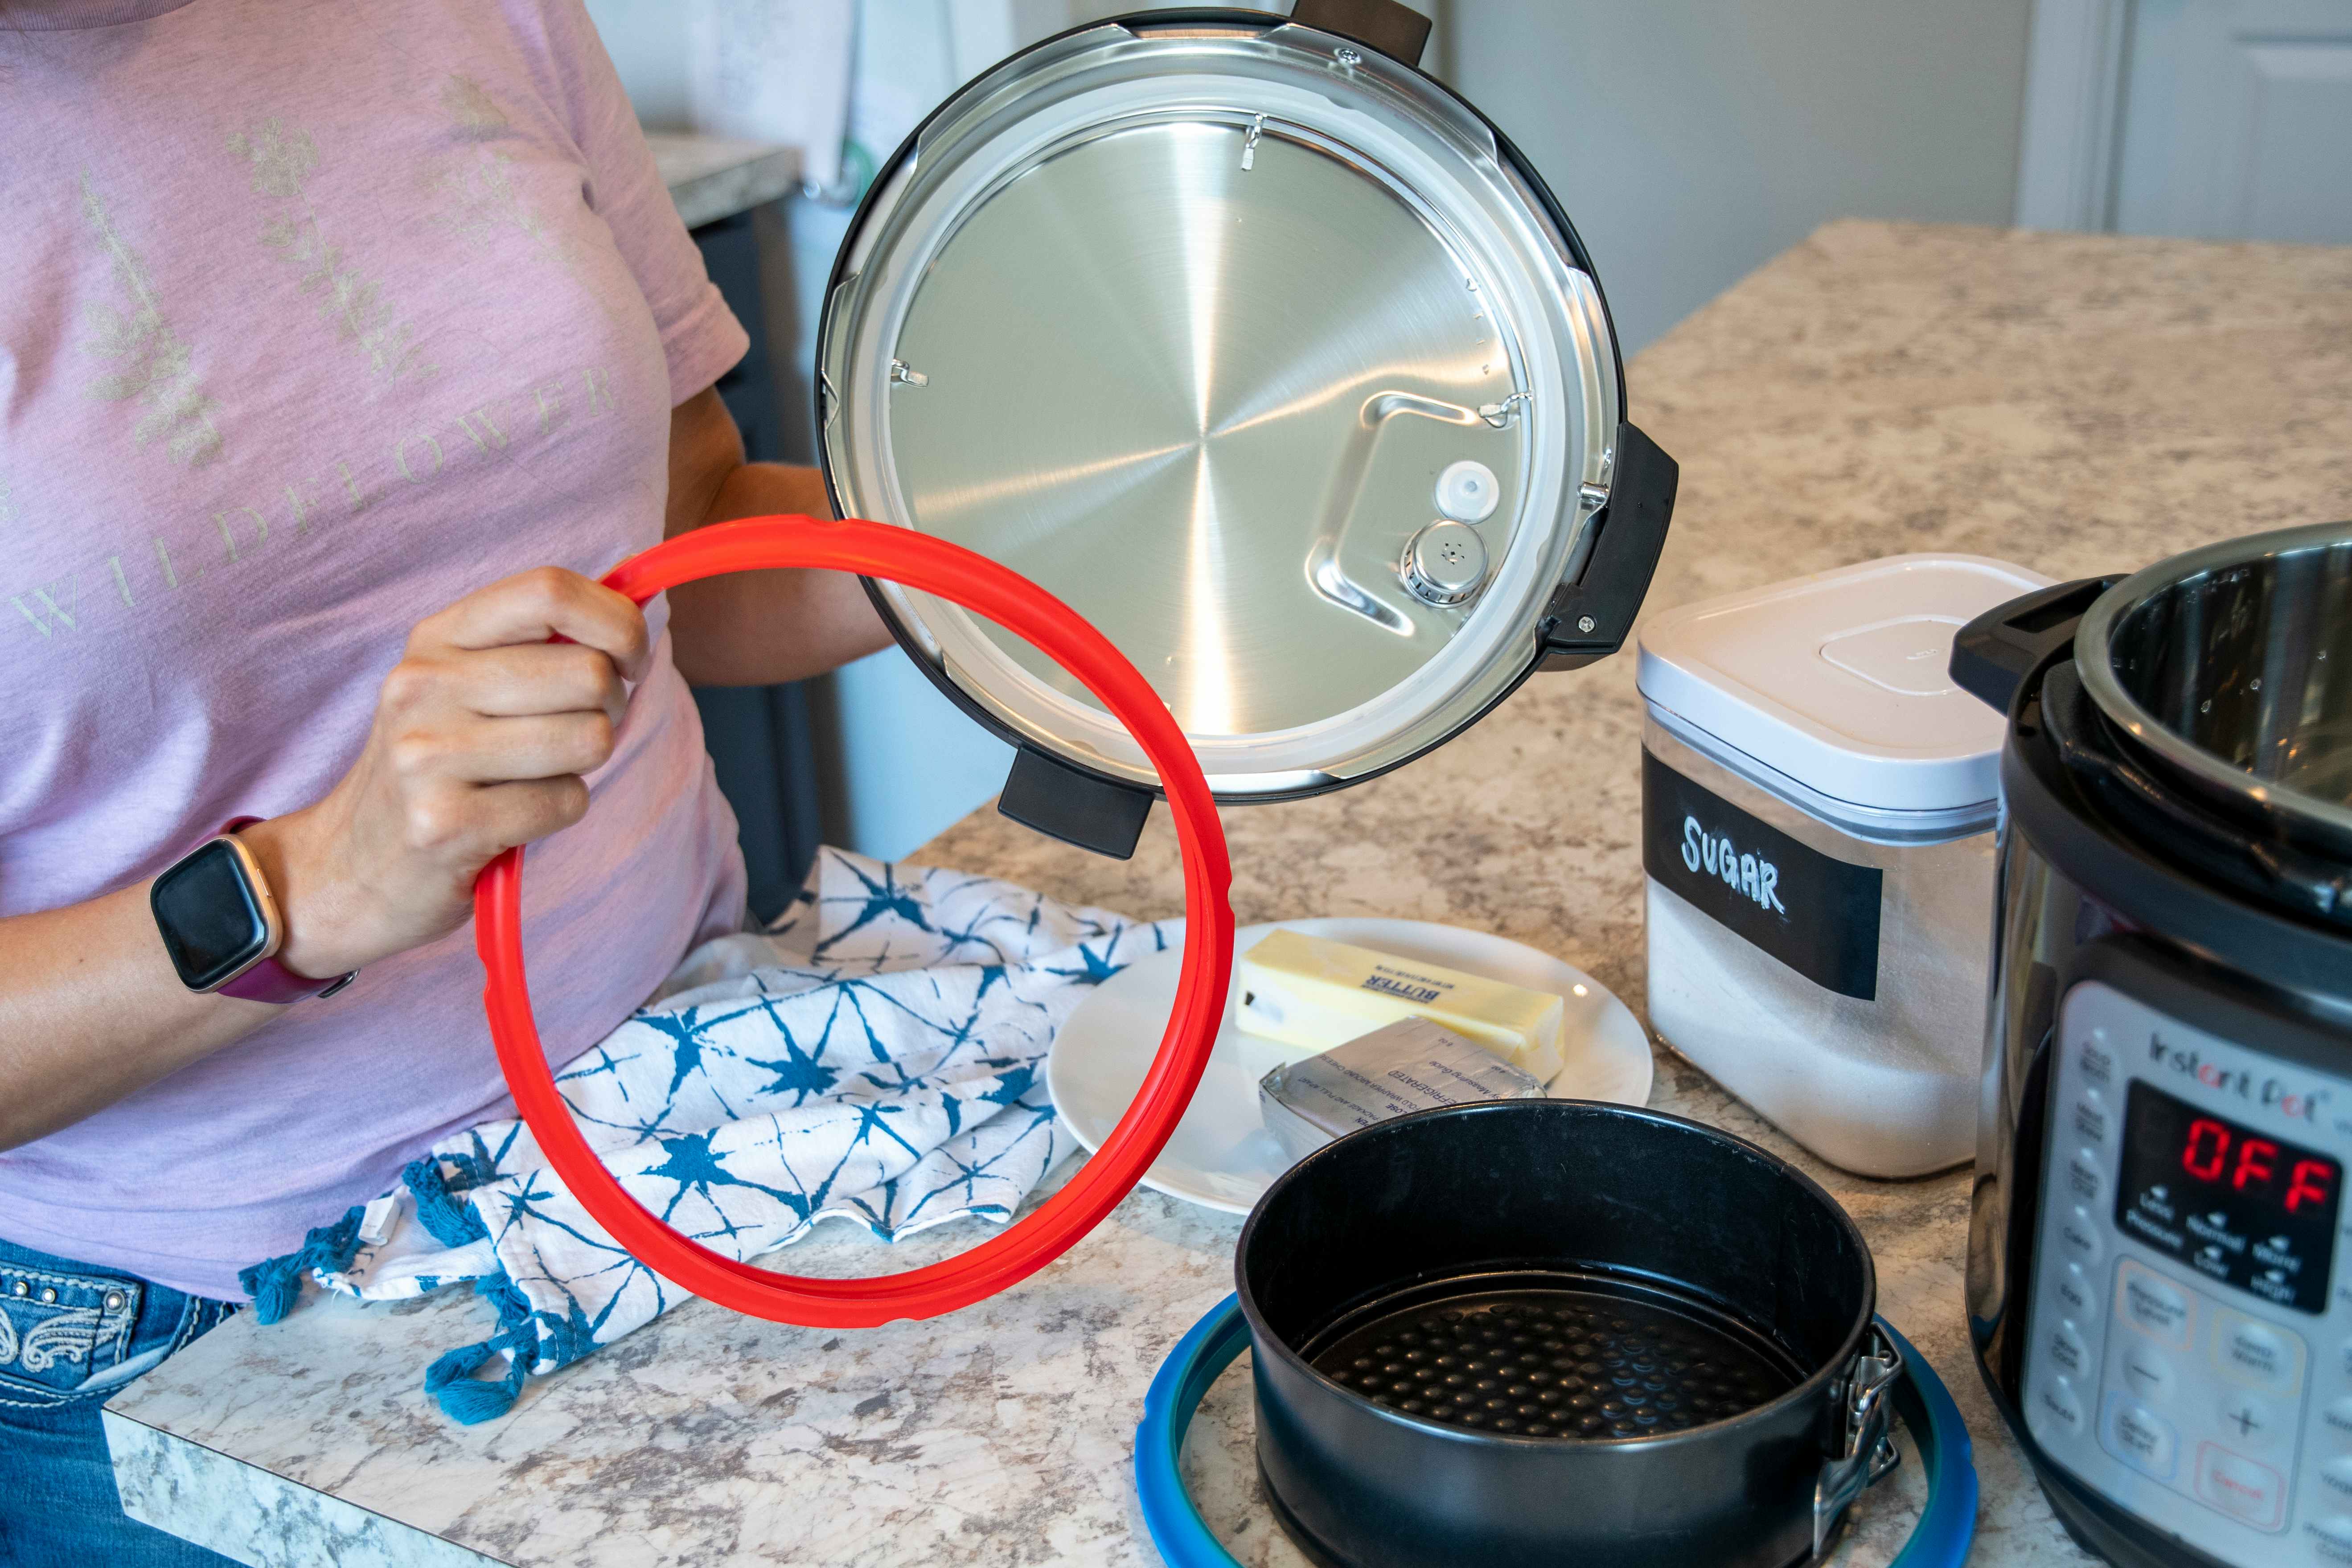 https://prod-cdn-thekrazycouponlady.imgix.net/wp-content/uploads/2018/04/instant-pot-mistakes-change-sealing-rings-14-1628200848-1628200848.jpg?auto=format&fit=fill&q=25